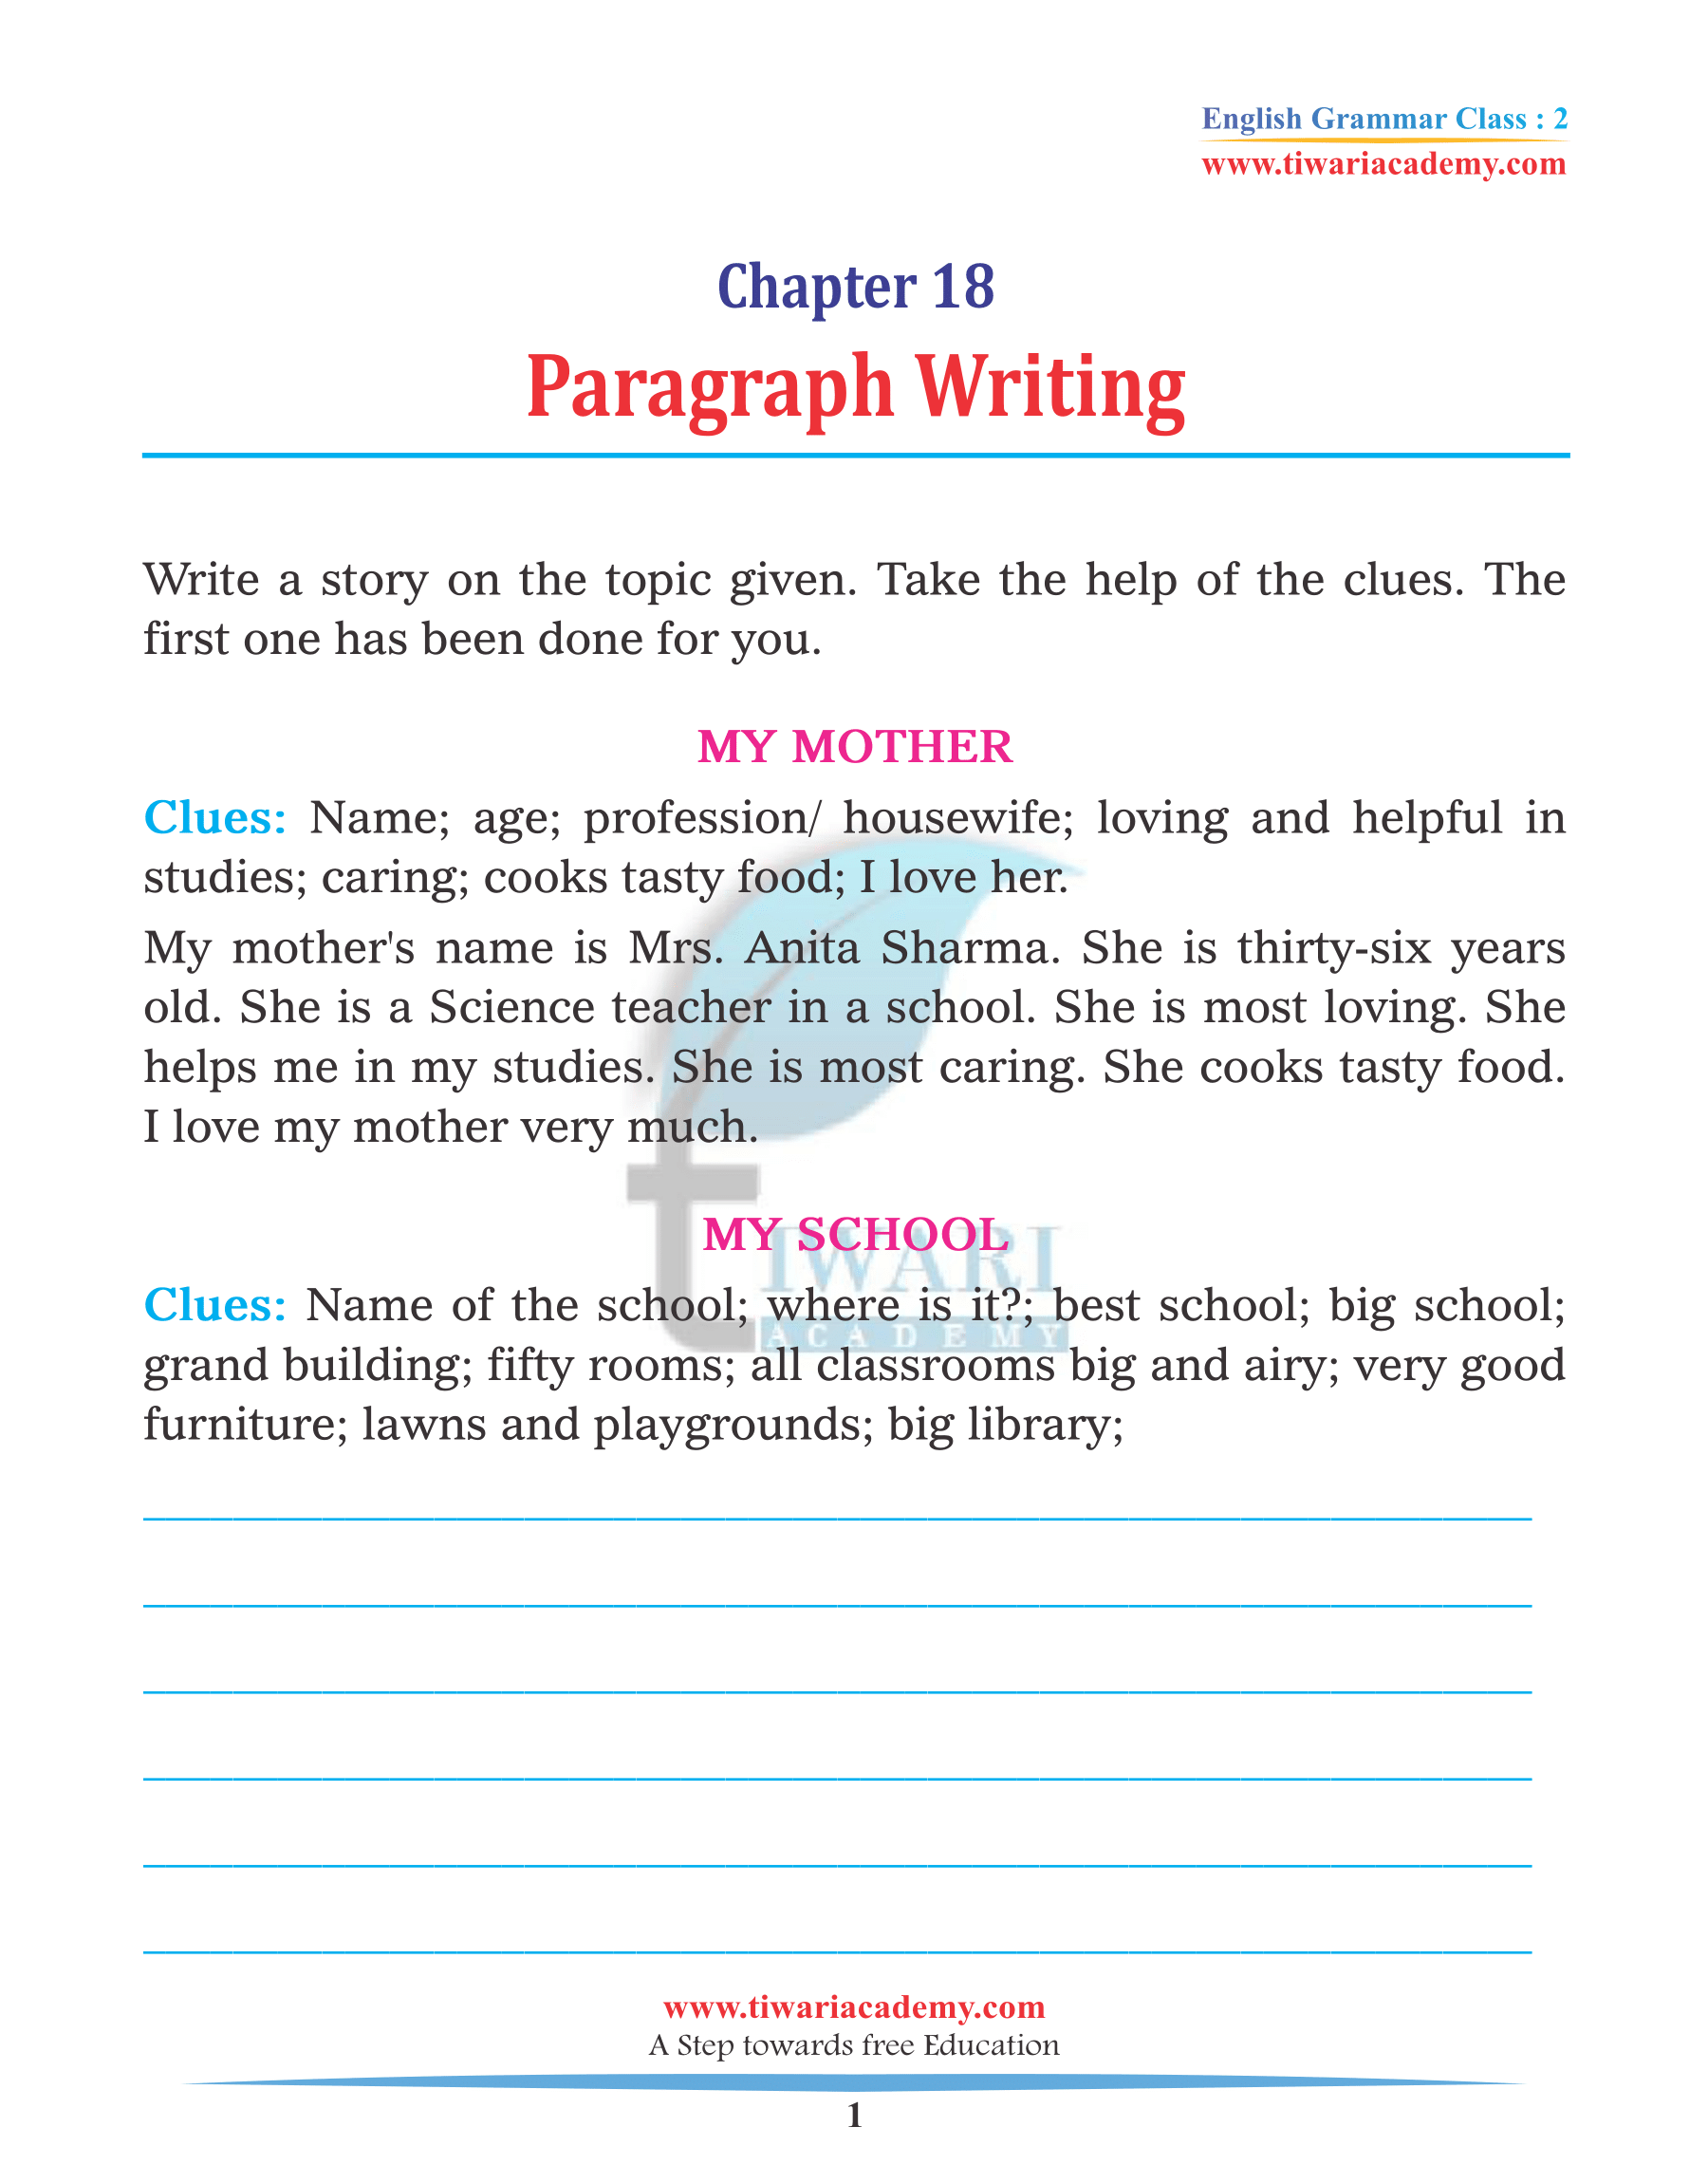 format of paragraph writing in english